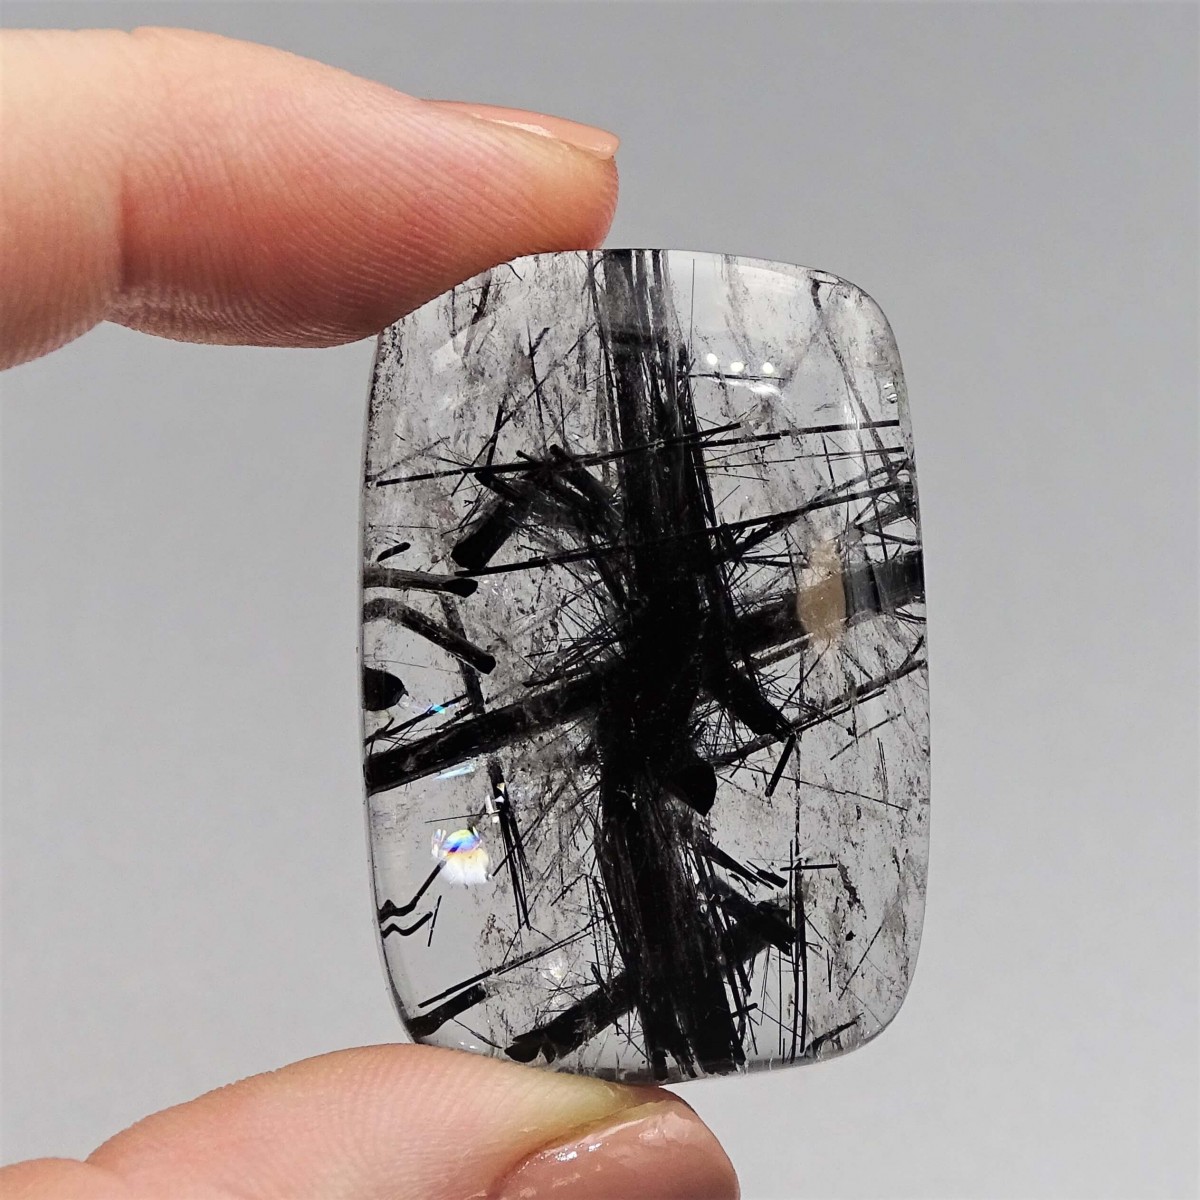 Crystal with black rutile cabochon 15.2g, Brazil